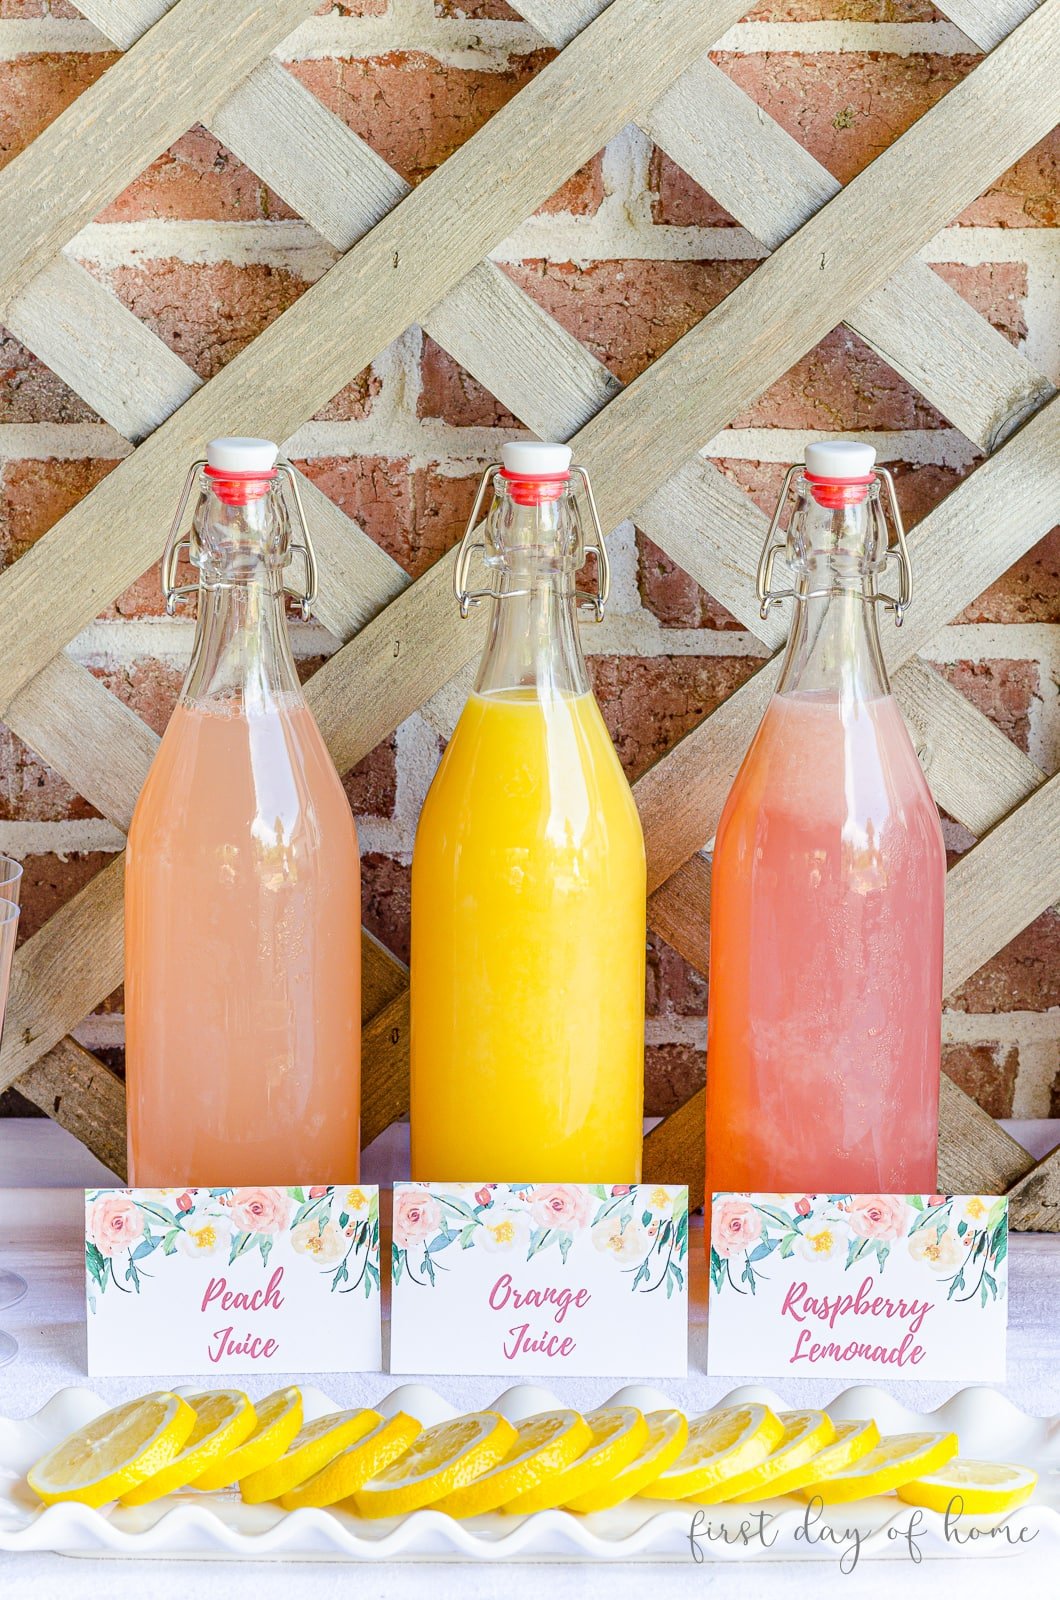 Mimosa bar juices with printable tags in front and lemon wedges to garnish